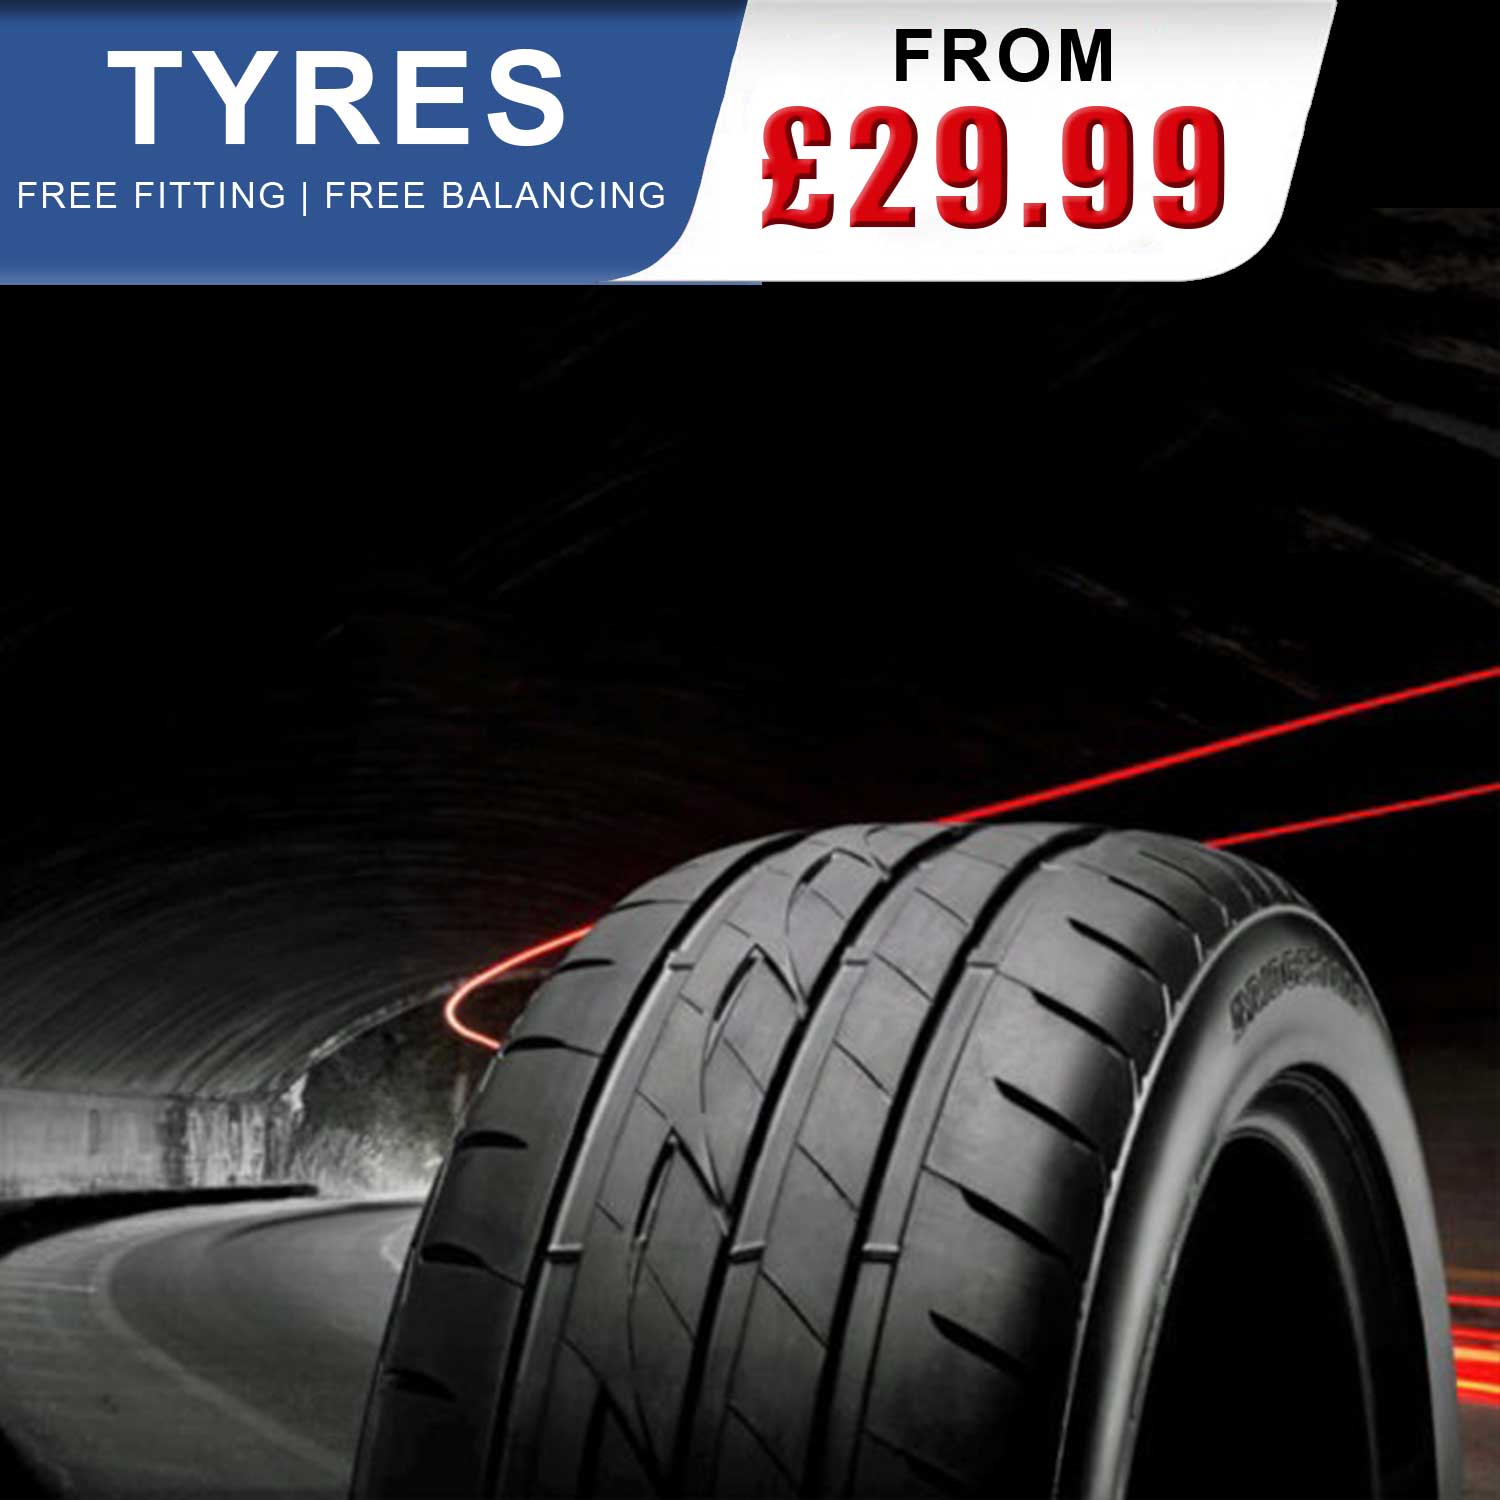 New Tyres - Buy Car & Vans Tyres - Save Up To £120 on New Tyres